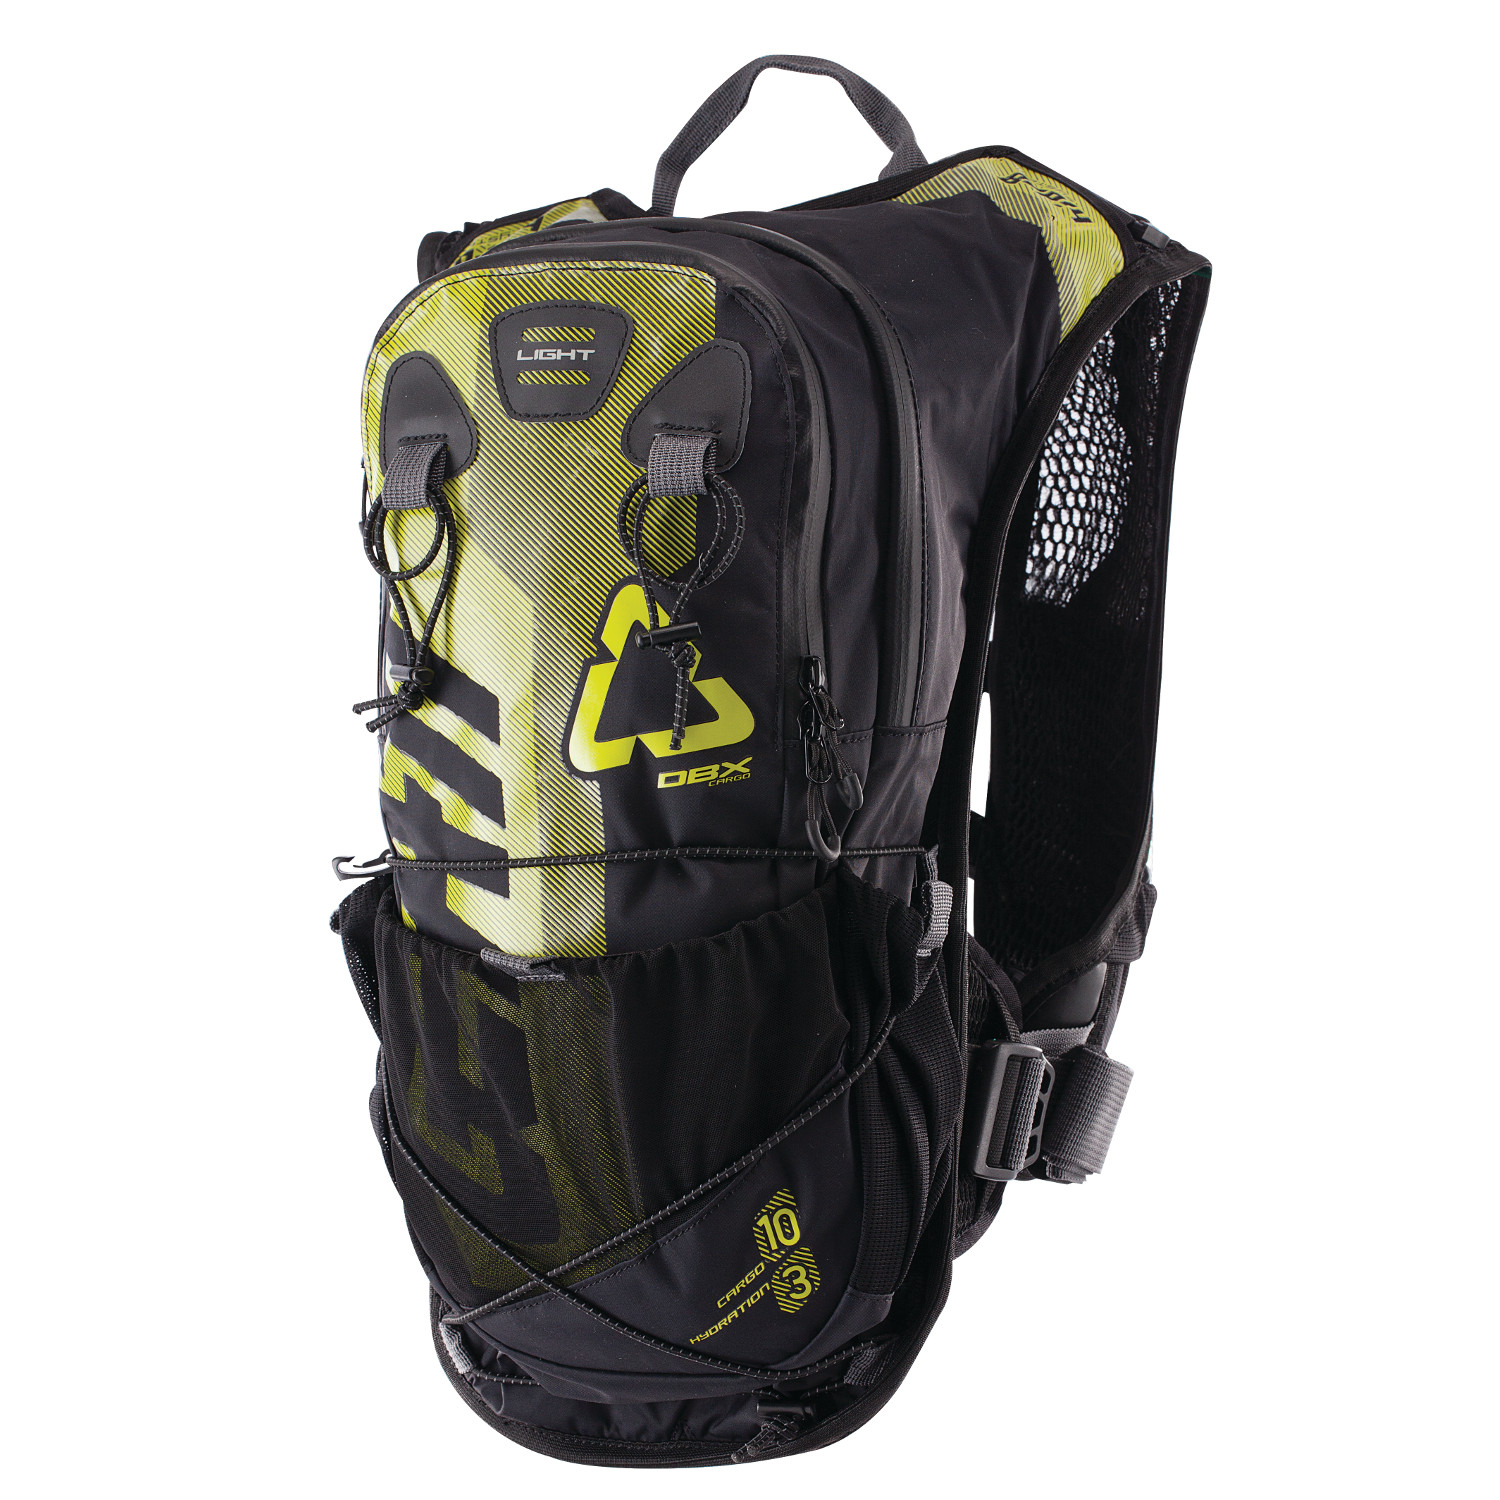 Leatt Backpack with Hydration System DBX Cargo 3.0 Black/Lime, 10 L